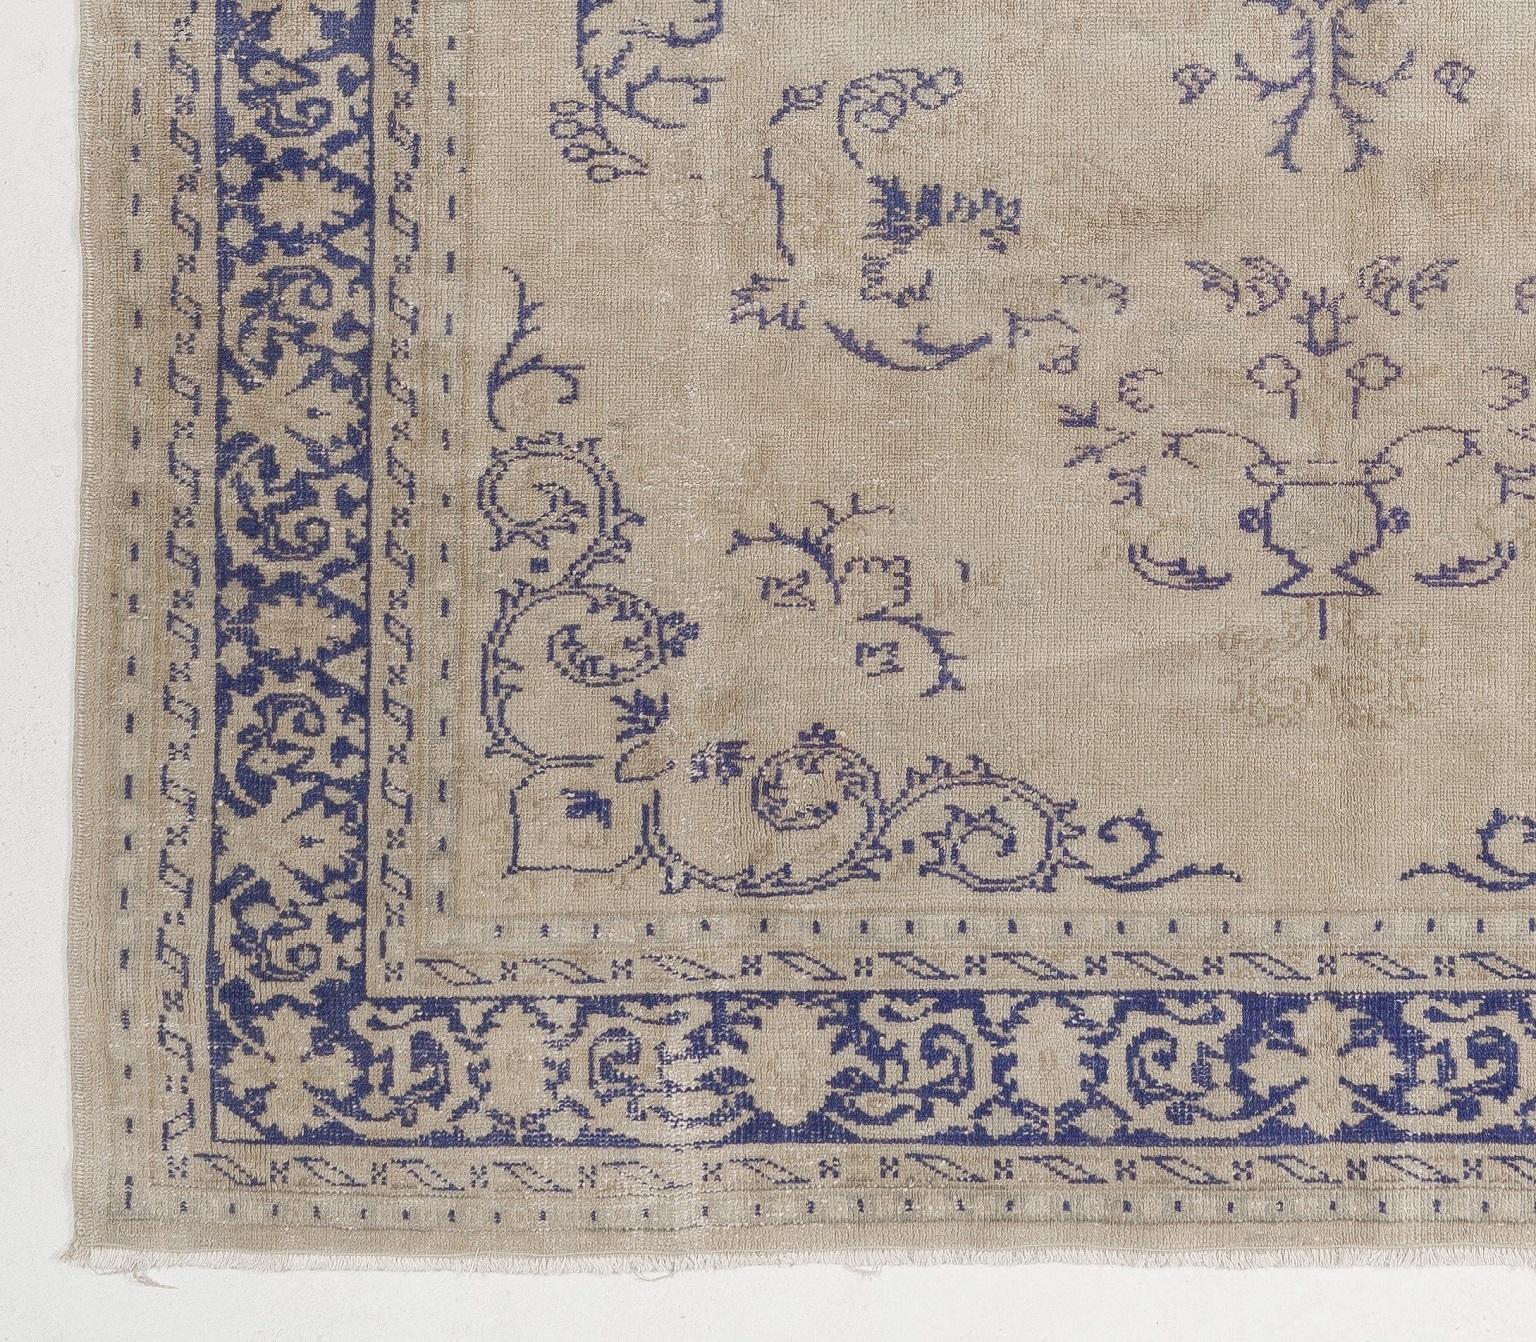 A finely hand-knotted vintage central Anatolian rug featuring a design of a sparsely drawn medallion and free floating scrolling vines in navy blue against a khaki colored the field. A great accompaniment to your interiors with its antique,